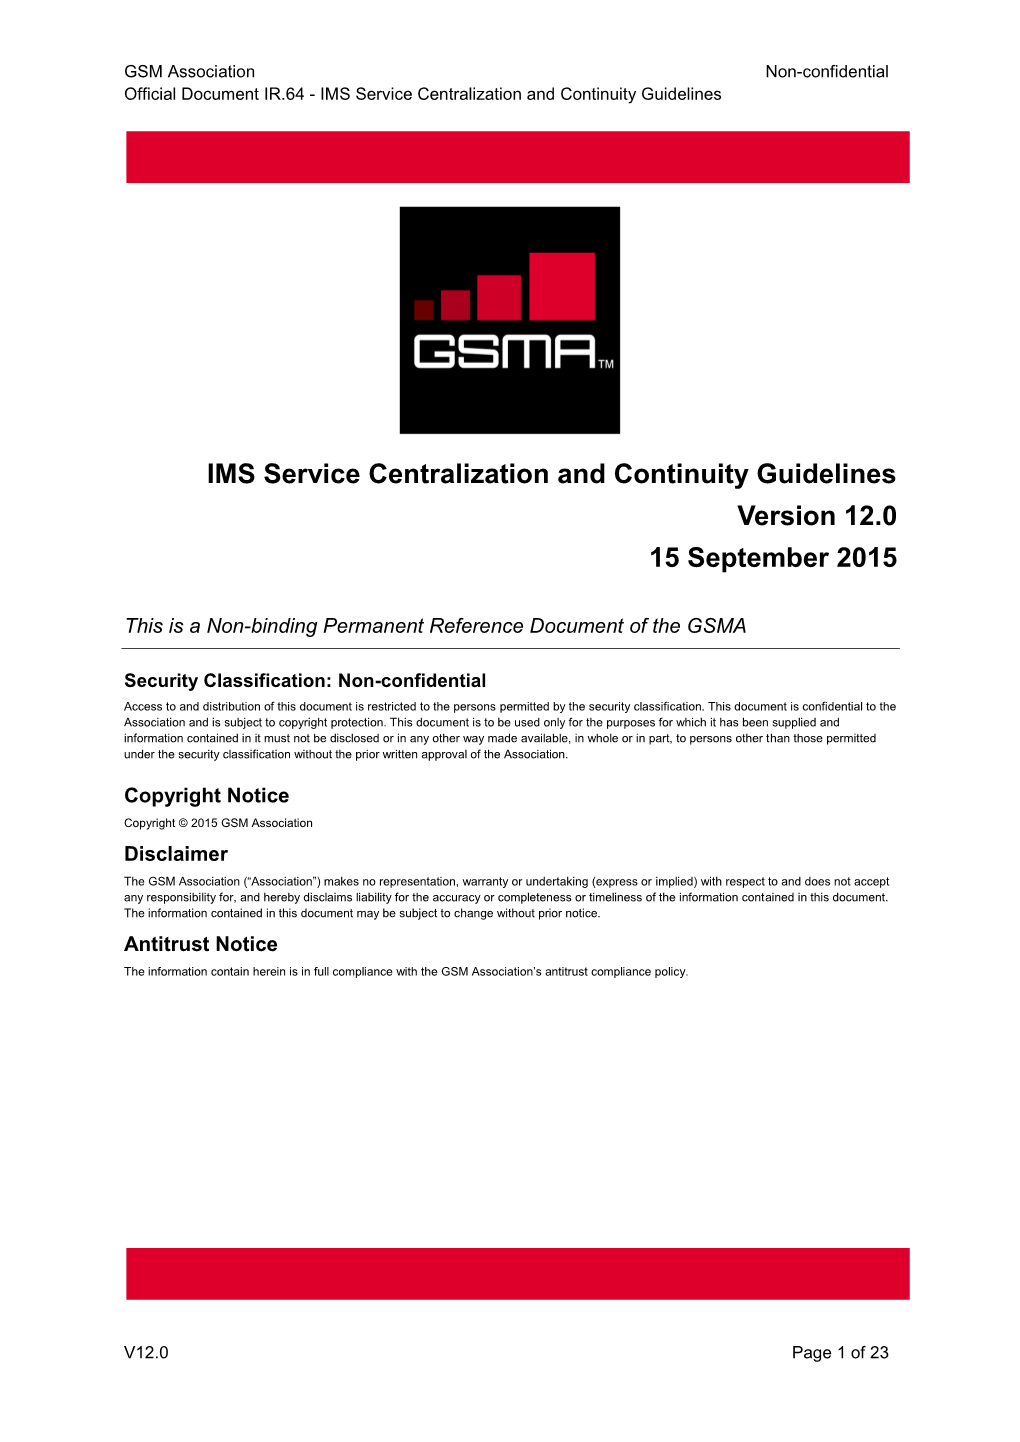 IR.64 - IMS Service Centralization and Continuity Guidelines